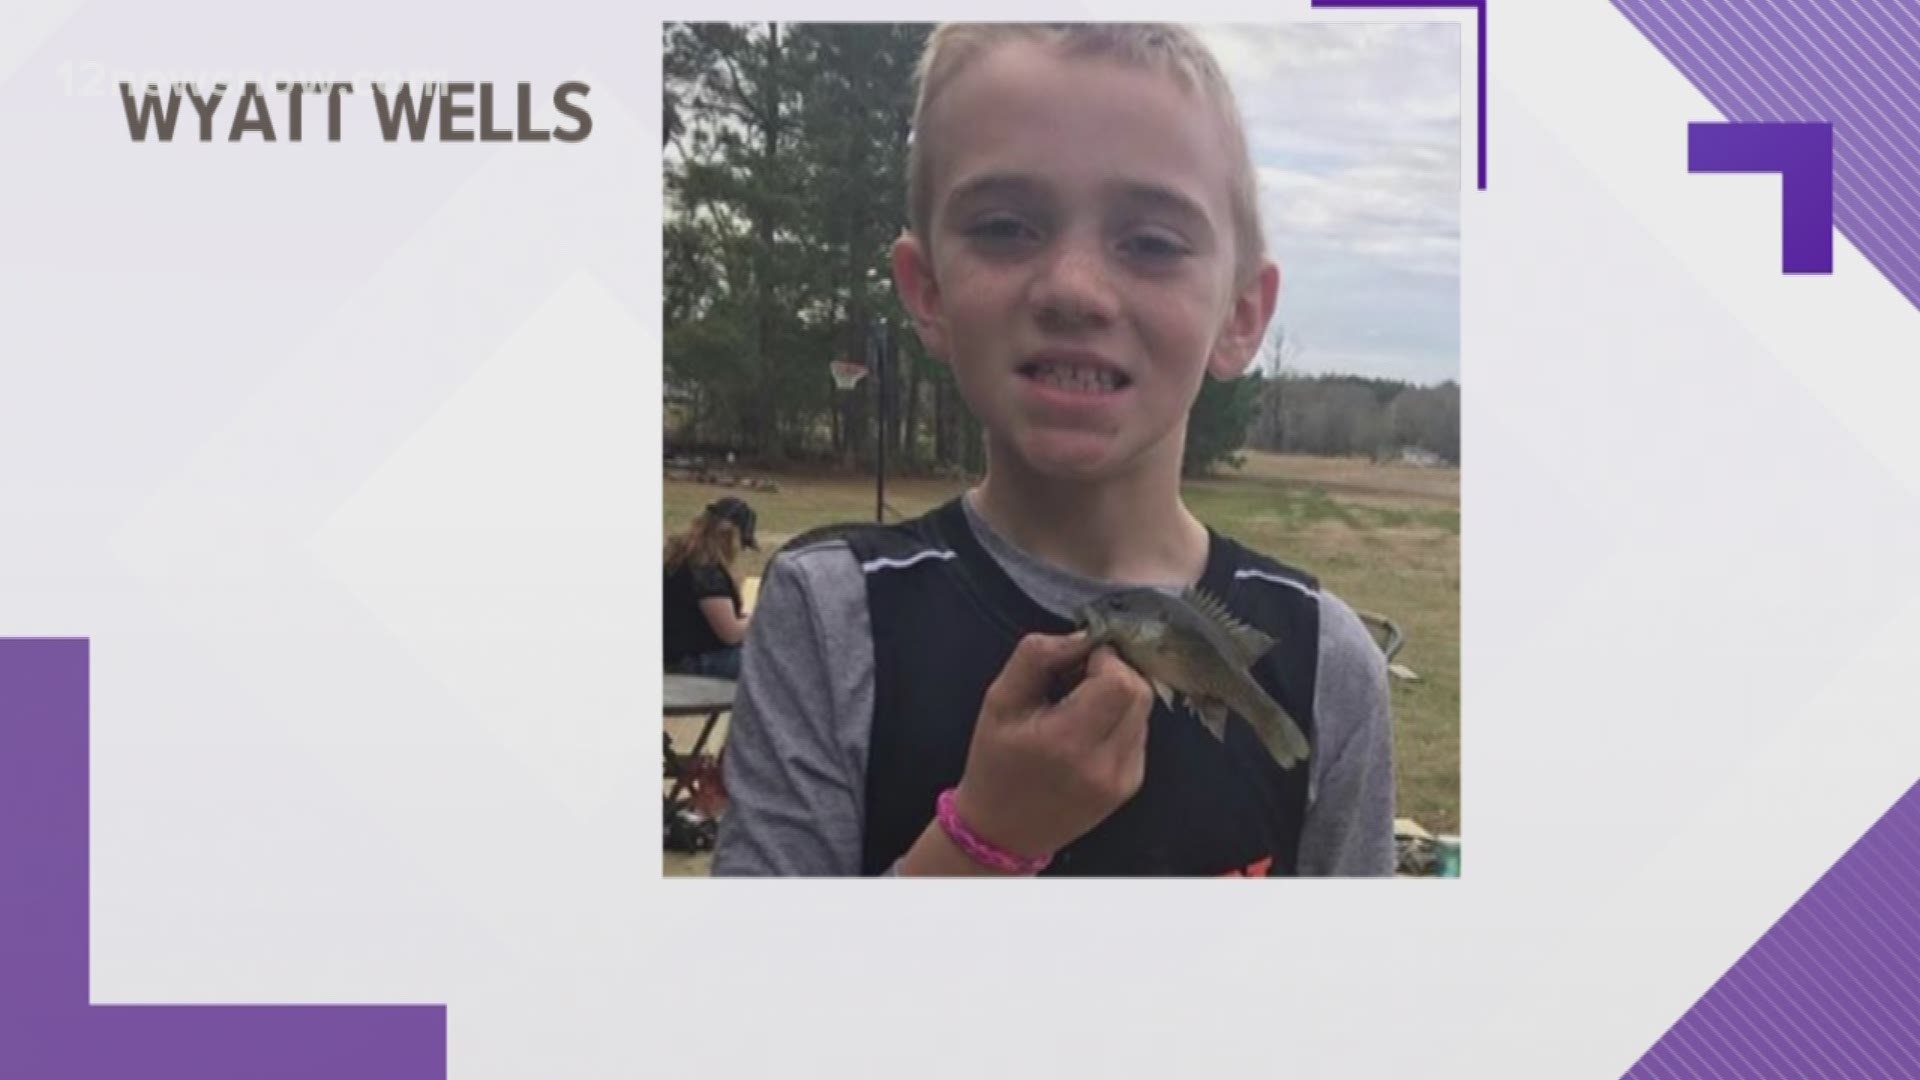 Wyatt Wells was killed and one other child was hurt.